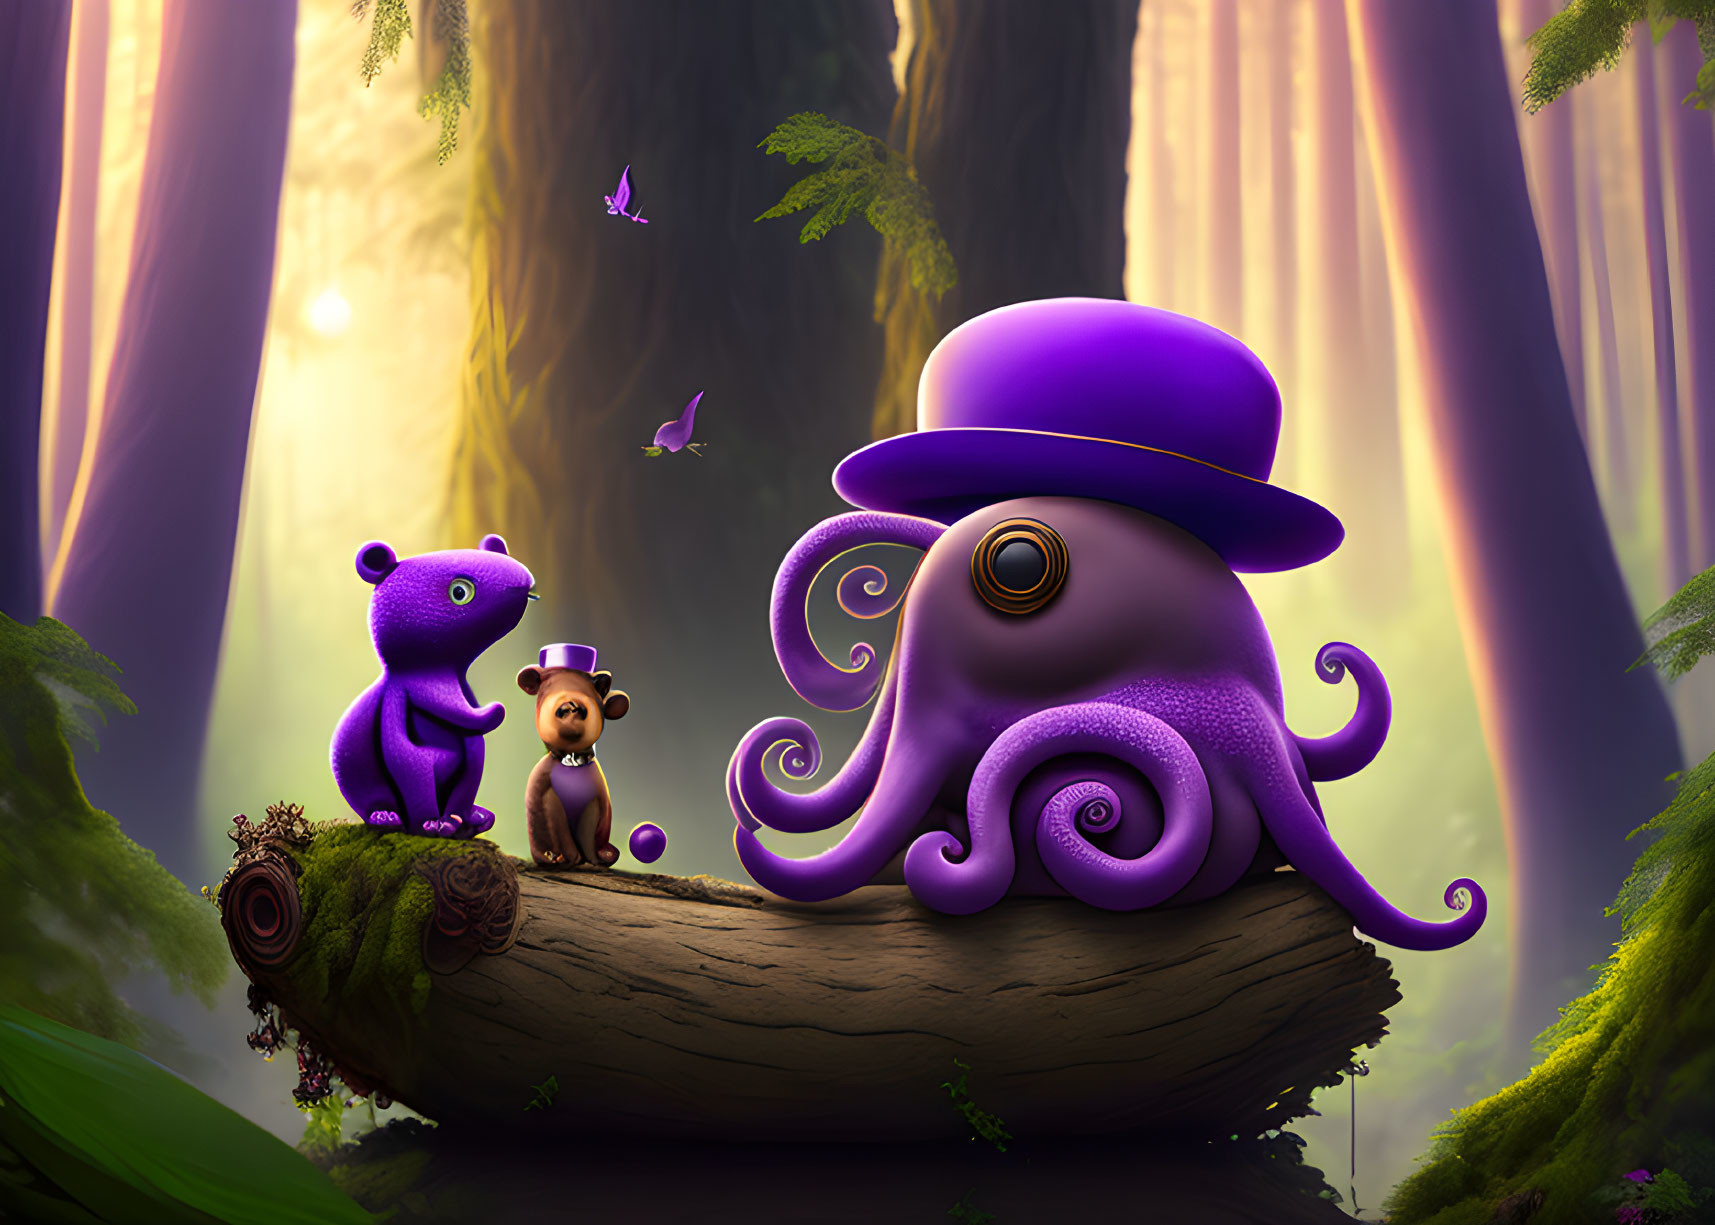 Colorful illustration of purple octopus with top hat in enchanted forest